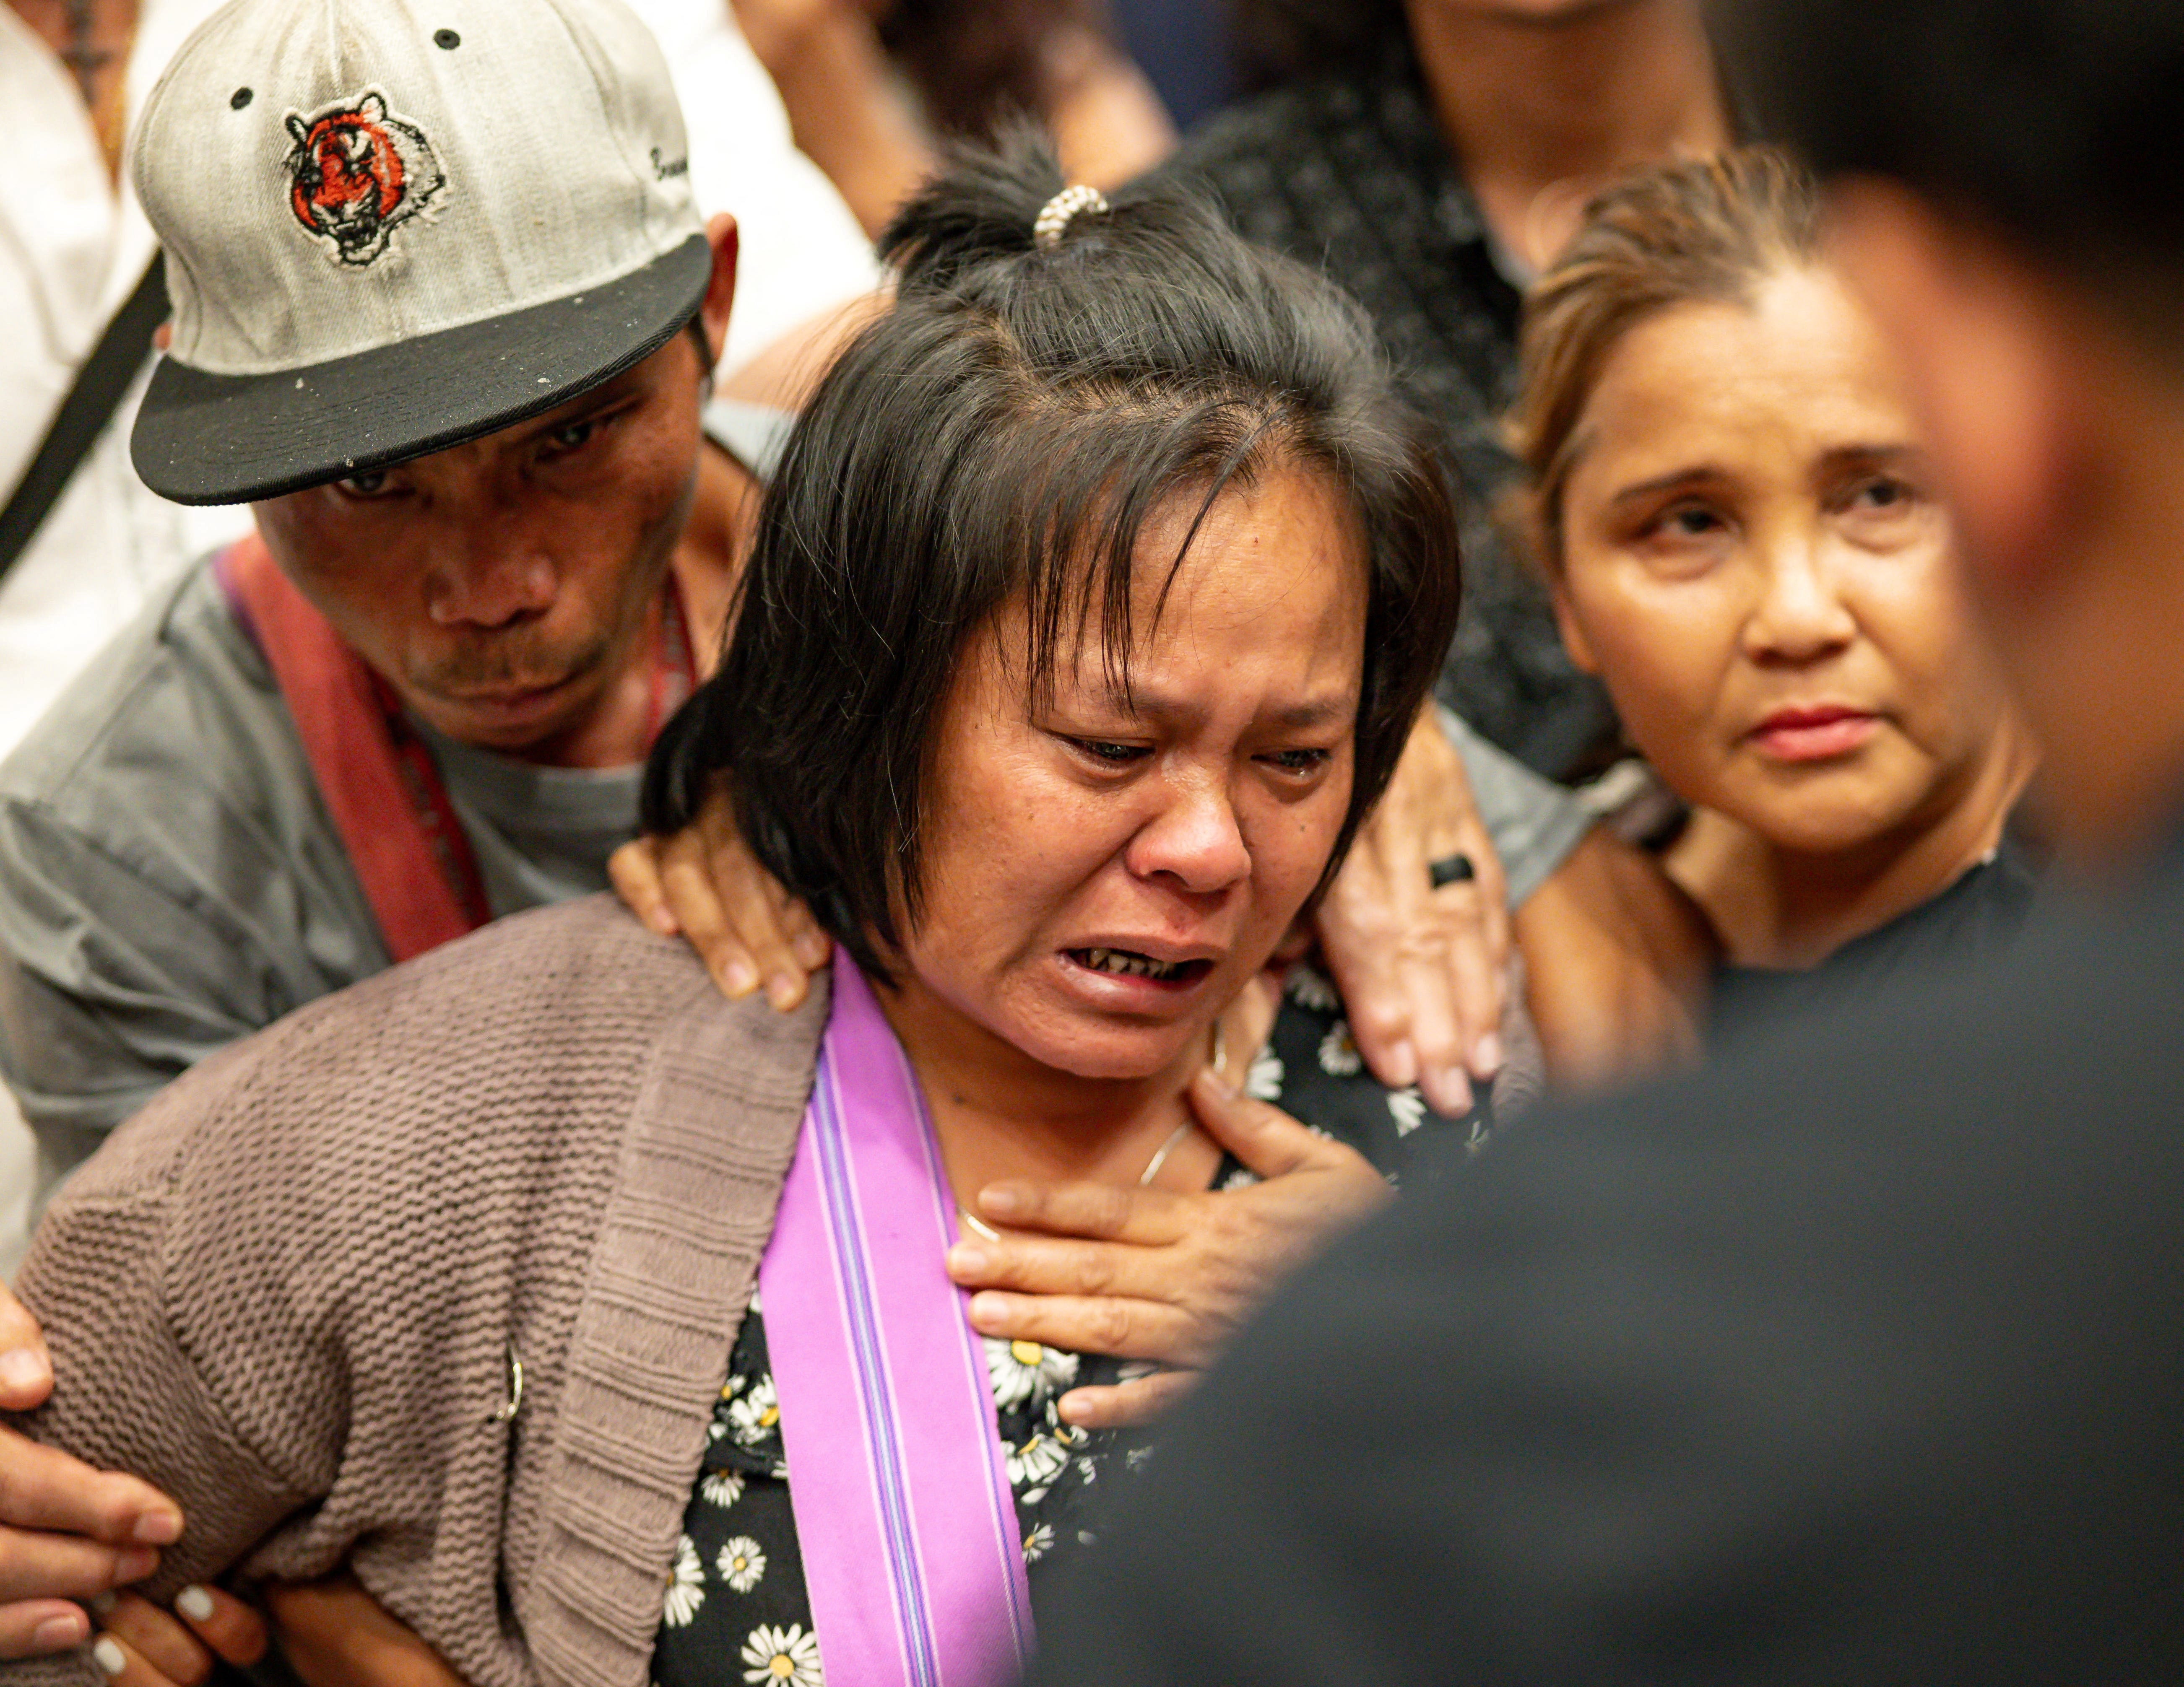 The mother of the 13 year old boy who was shot and killed by Utica Police cries after listening to a translator inside City Hall in Utica, New York on June 29, 2024